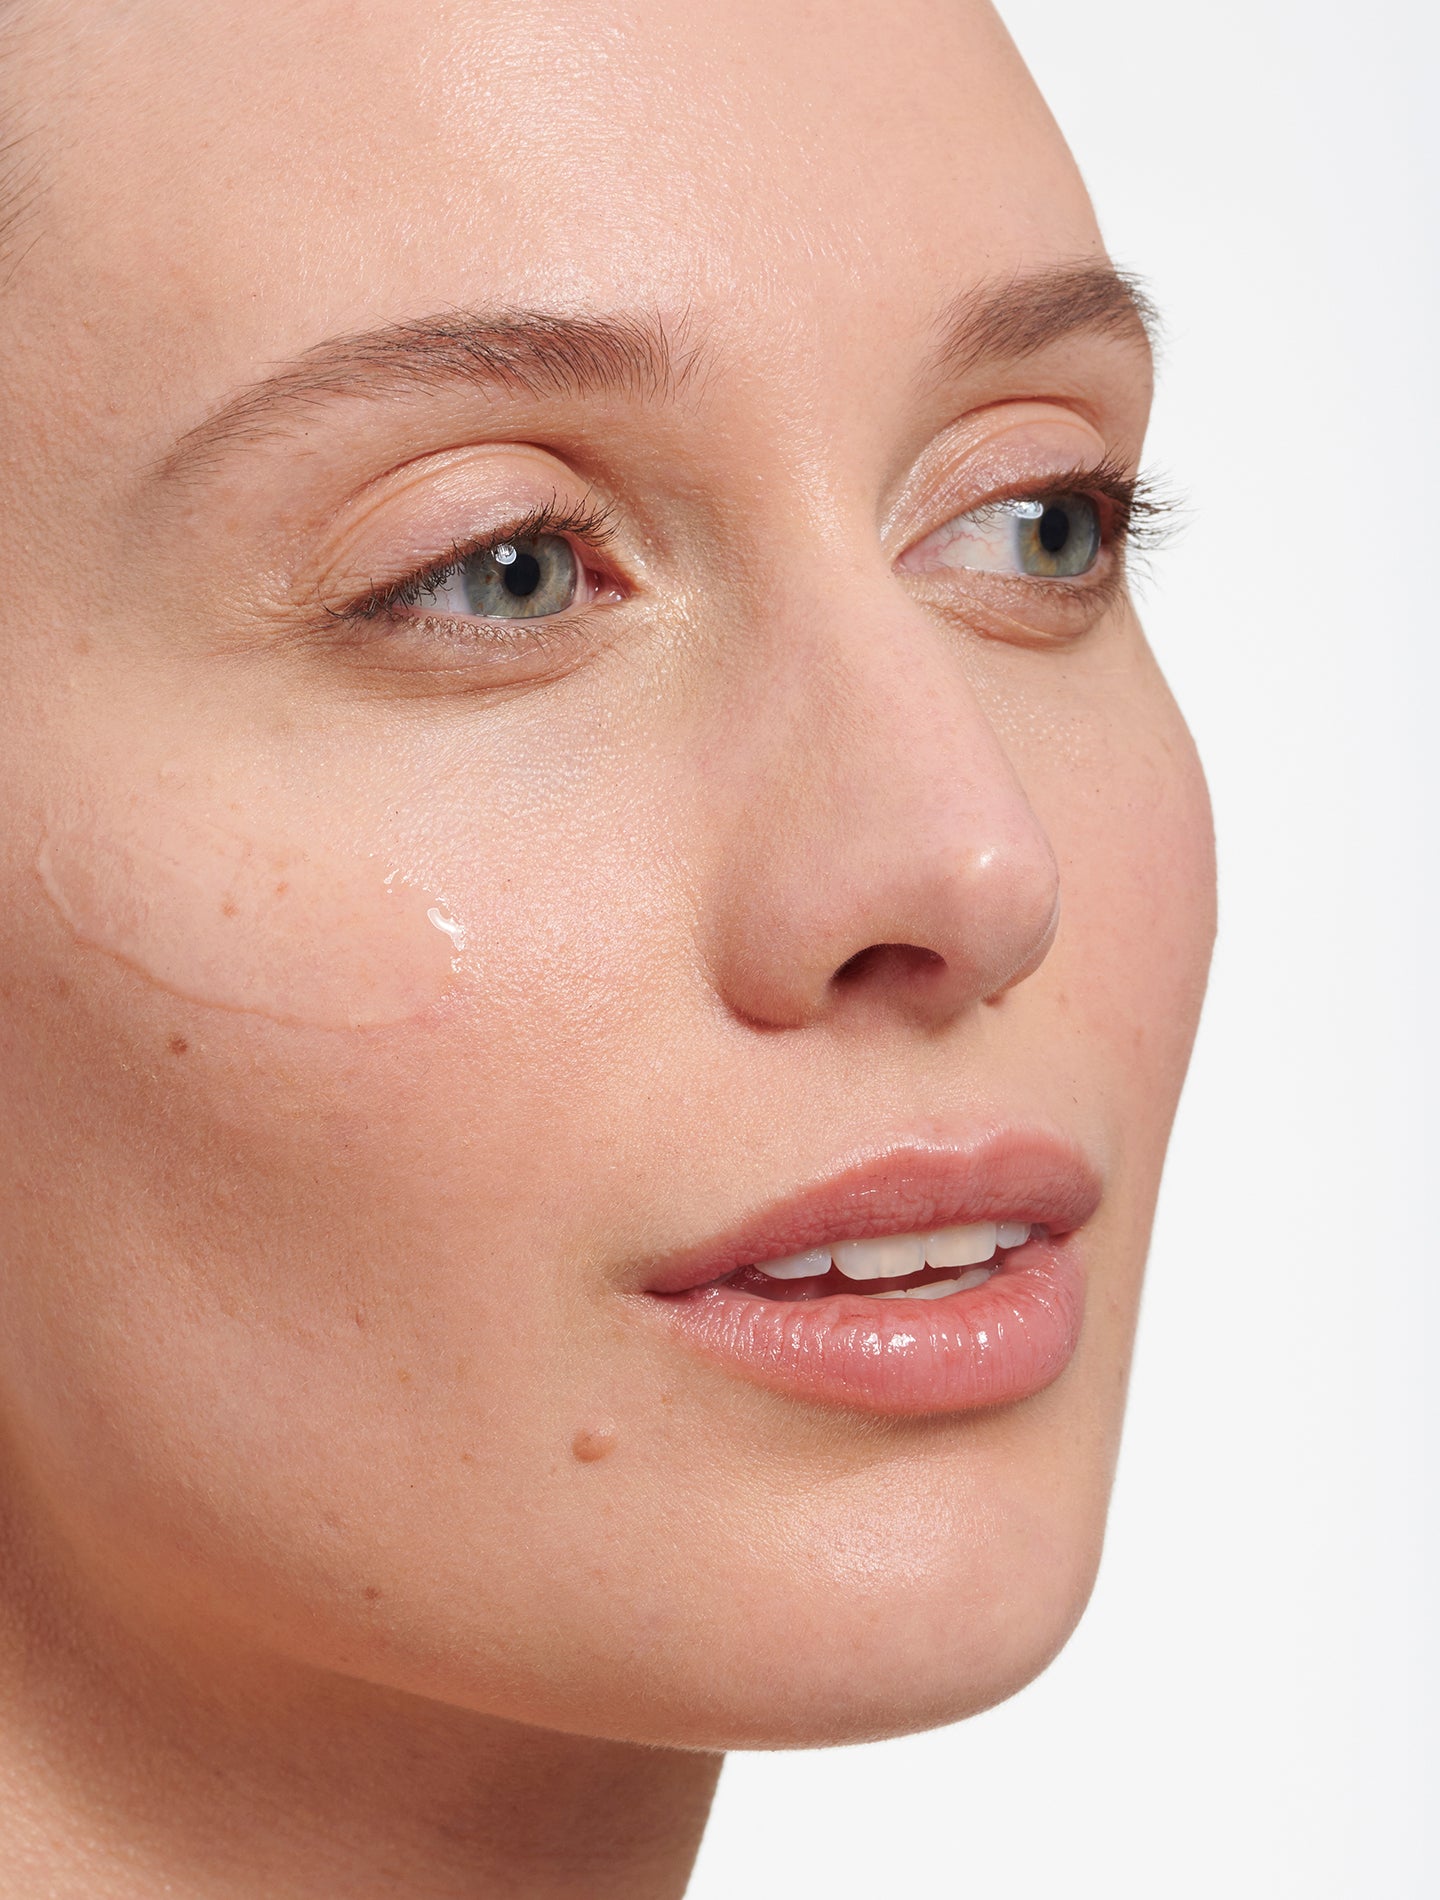 How to Make Your Skin Lighter in 7 Effective Ways